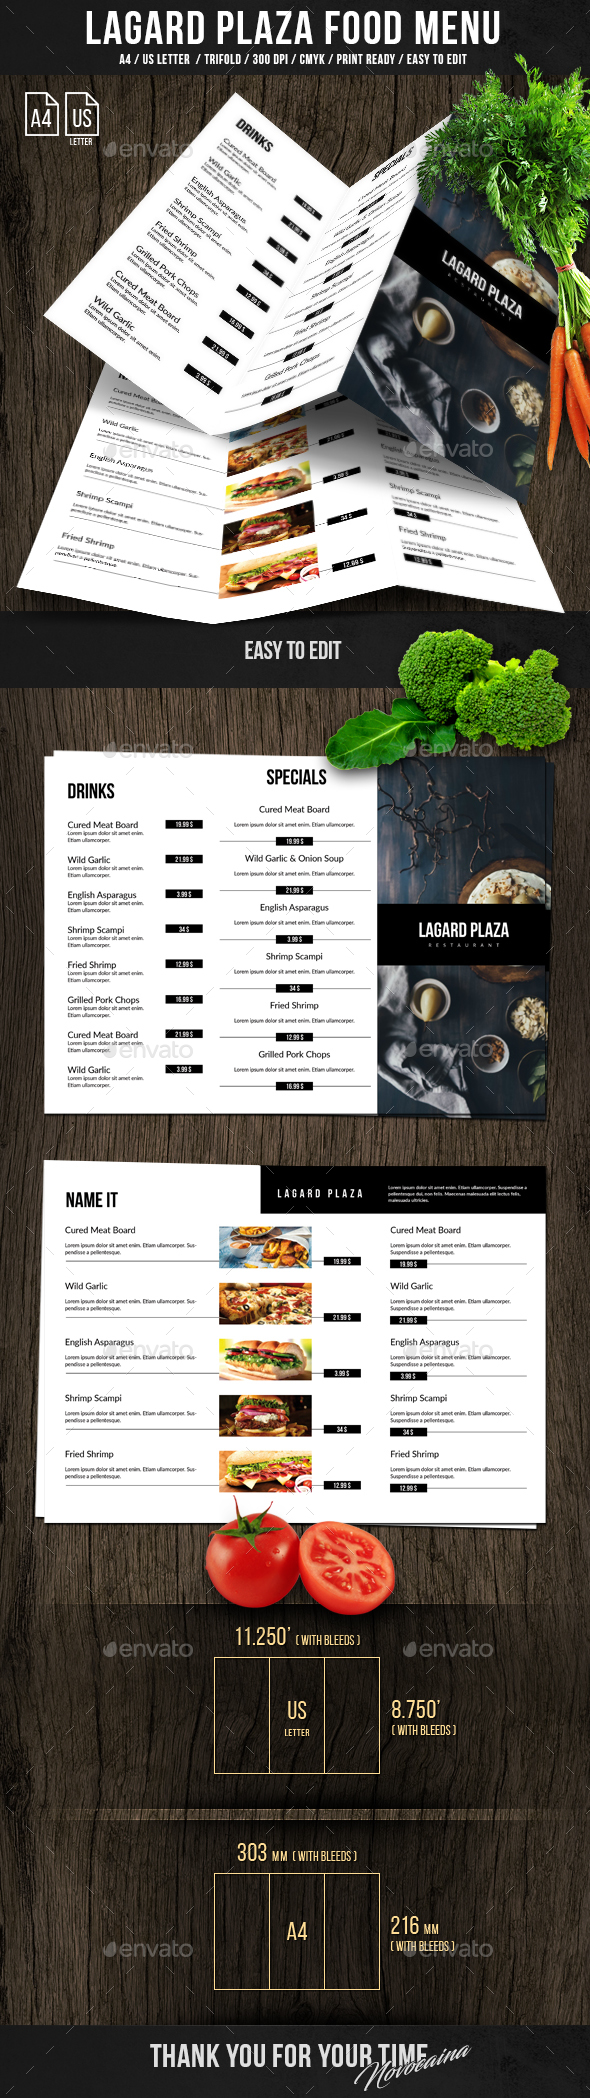  Lagard Plaza Trifold A4 and US Letter Menu 